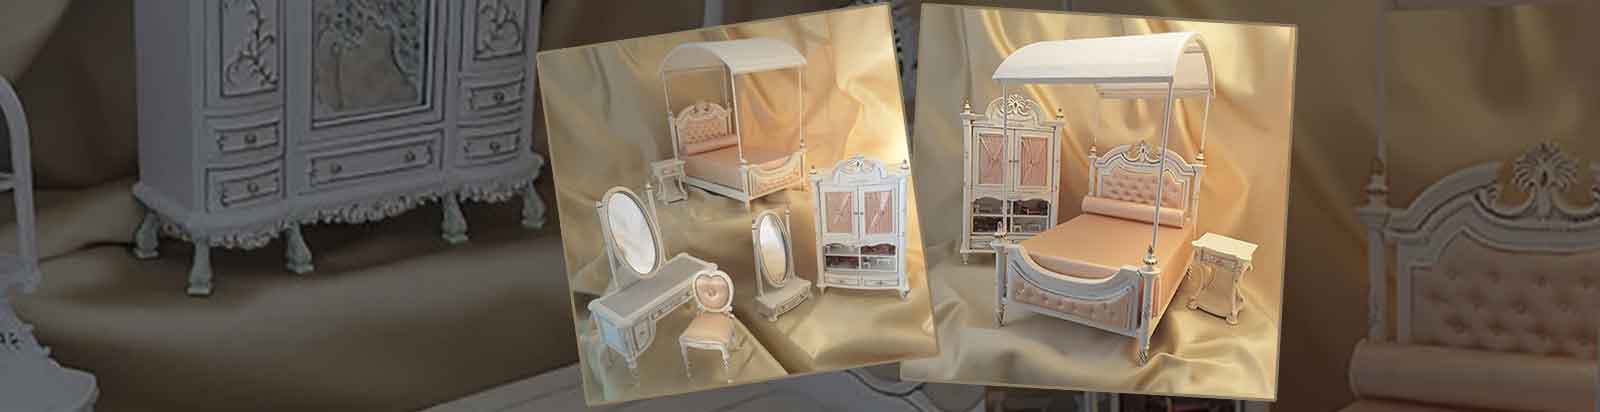 I do Believe in Fairies Dollhouse Accessories 1:12 Scale Decorated Miniature Picture set on Wood Dolls House Picture